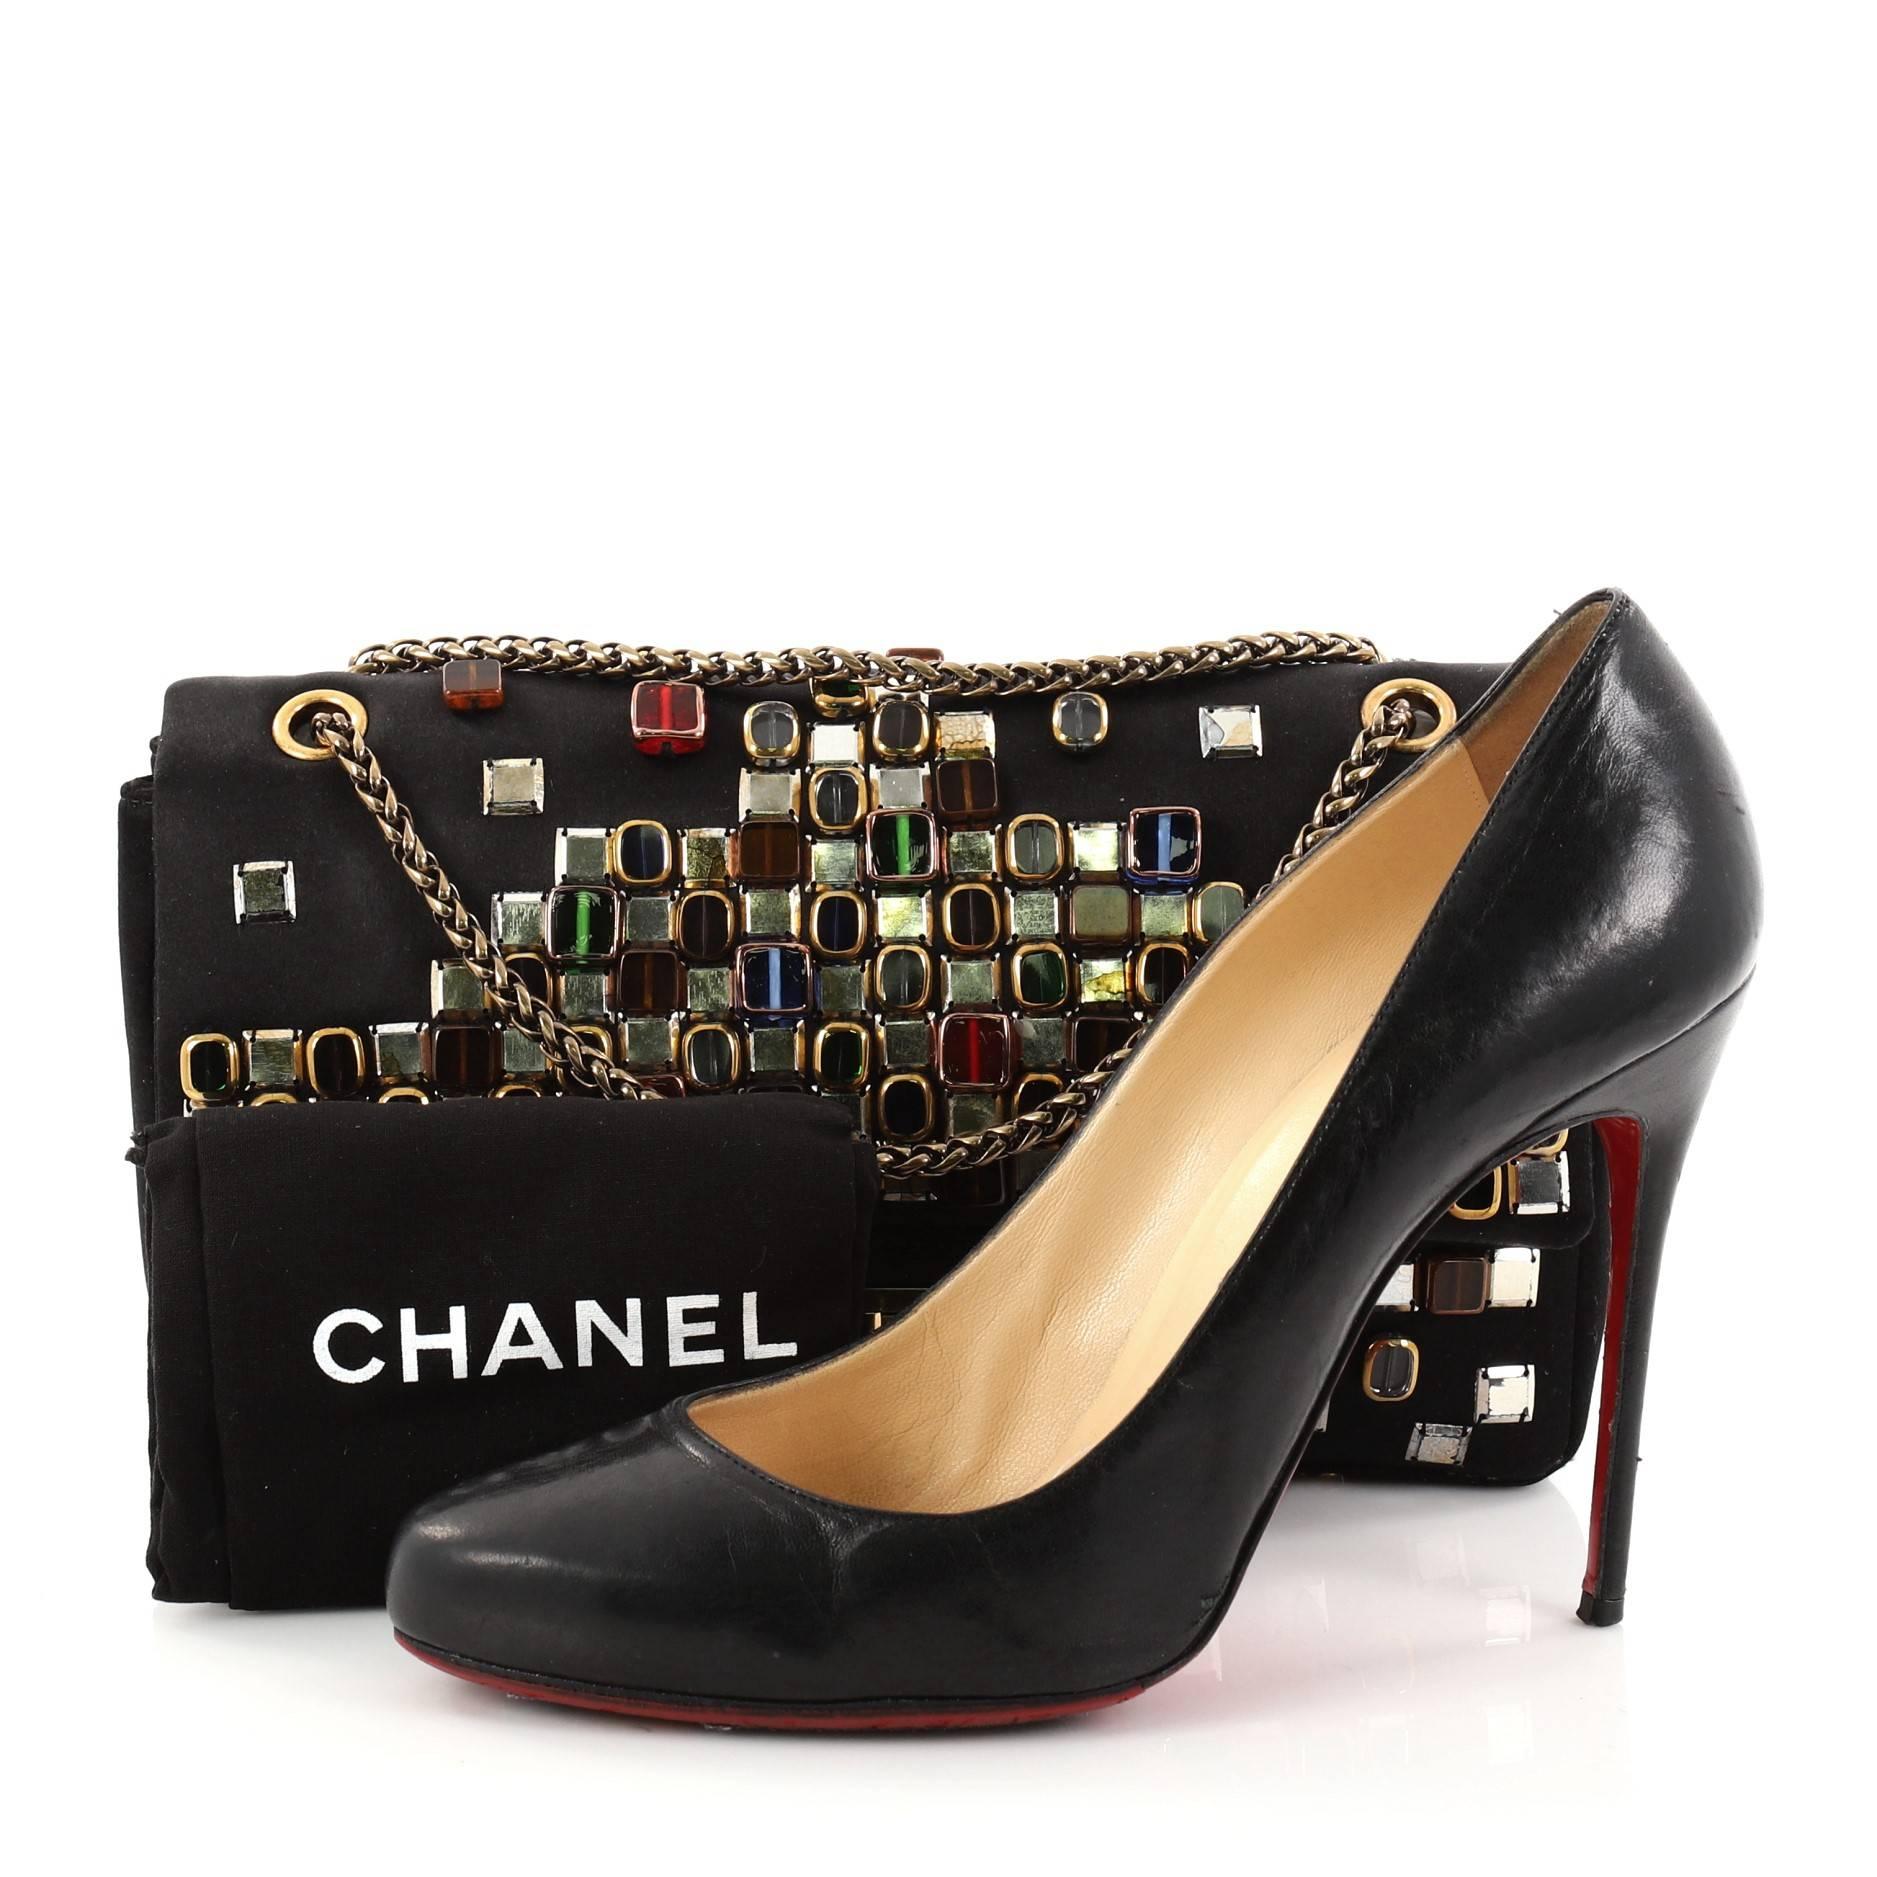 This authentic Chanel Paris-Byzance Reissue 2.55 Handbag Embellished Satin 225 is an elegant and timeless piece to add to any collection. Crafted from black satin with with multi-color gripoix beads & metal sequins, this stand-out flap features